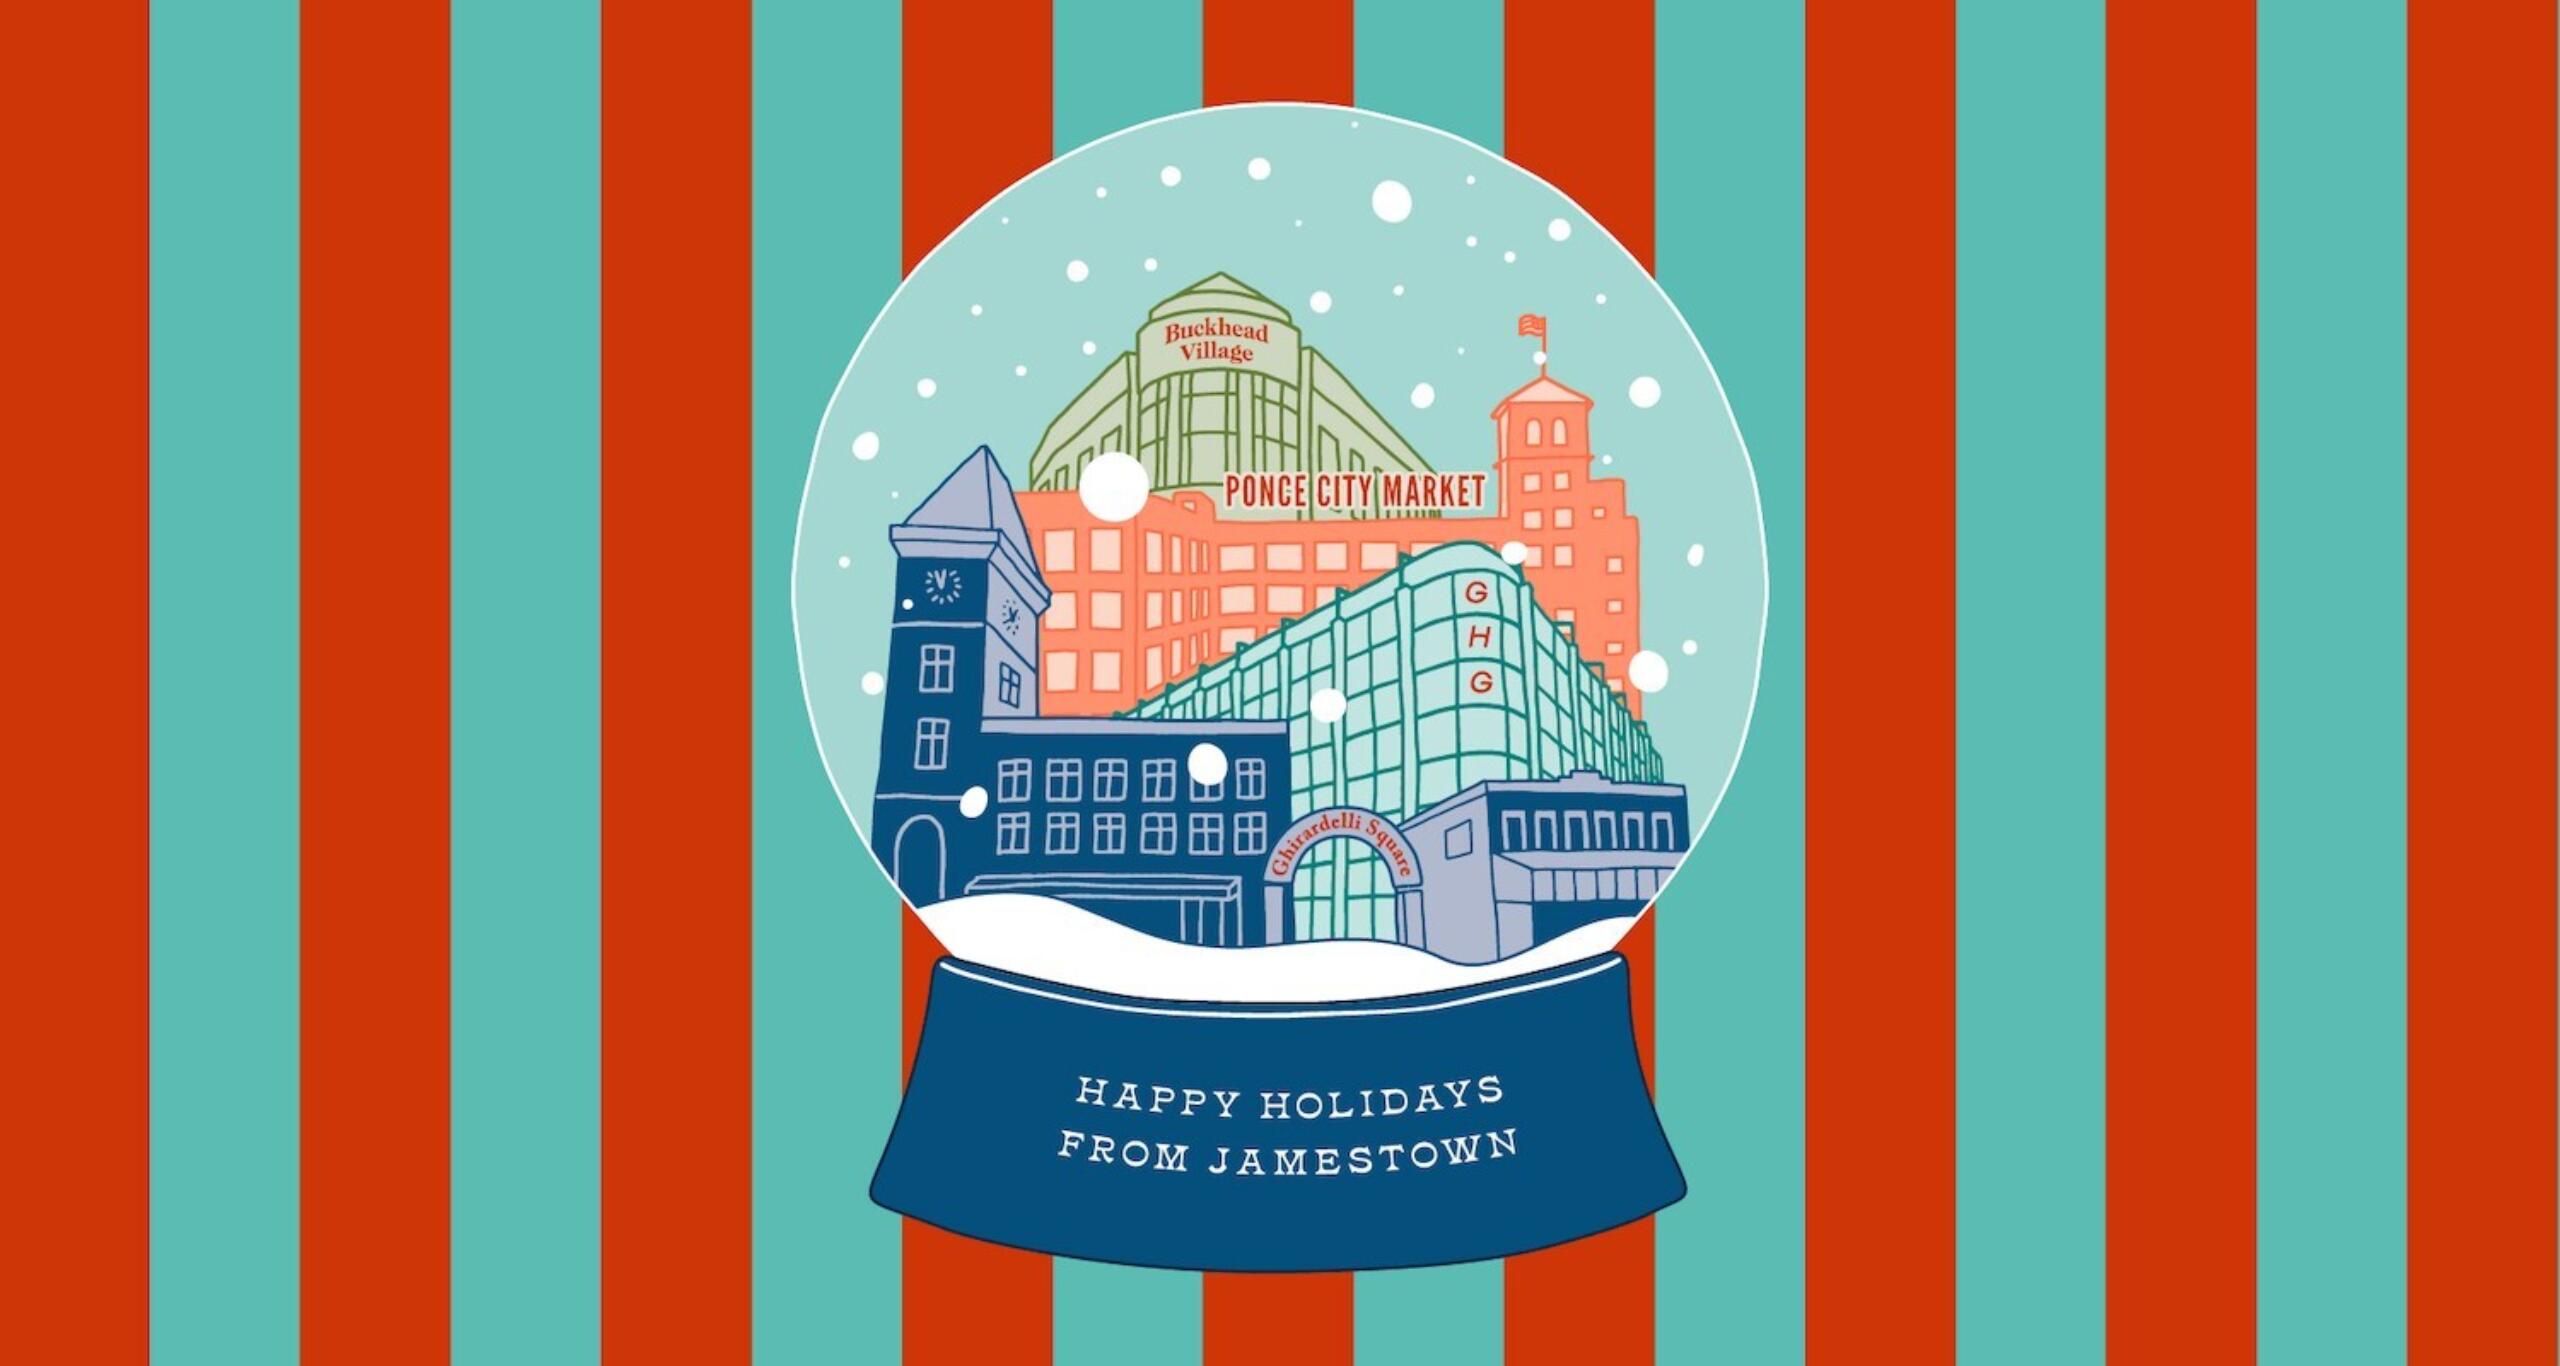 Illustration of snow globe with several buildings inside labeled Happy Holidays from Jamestown